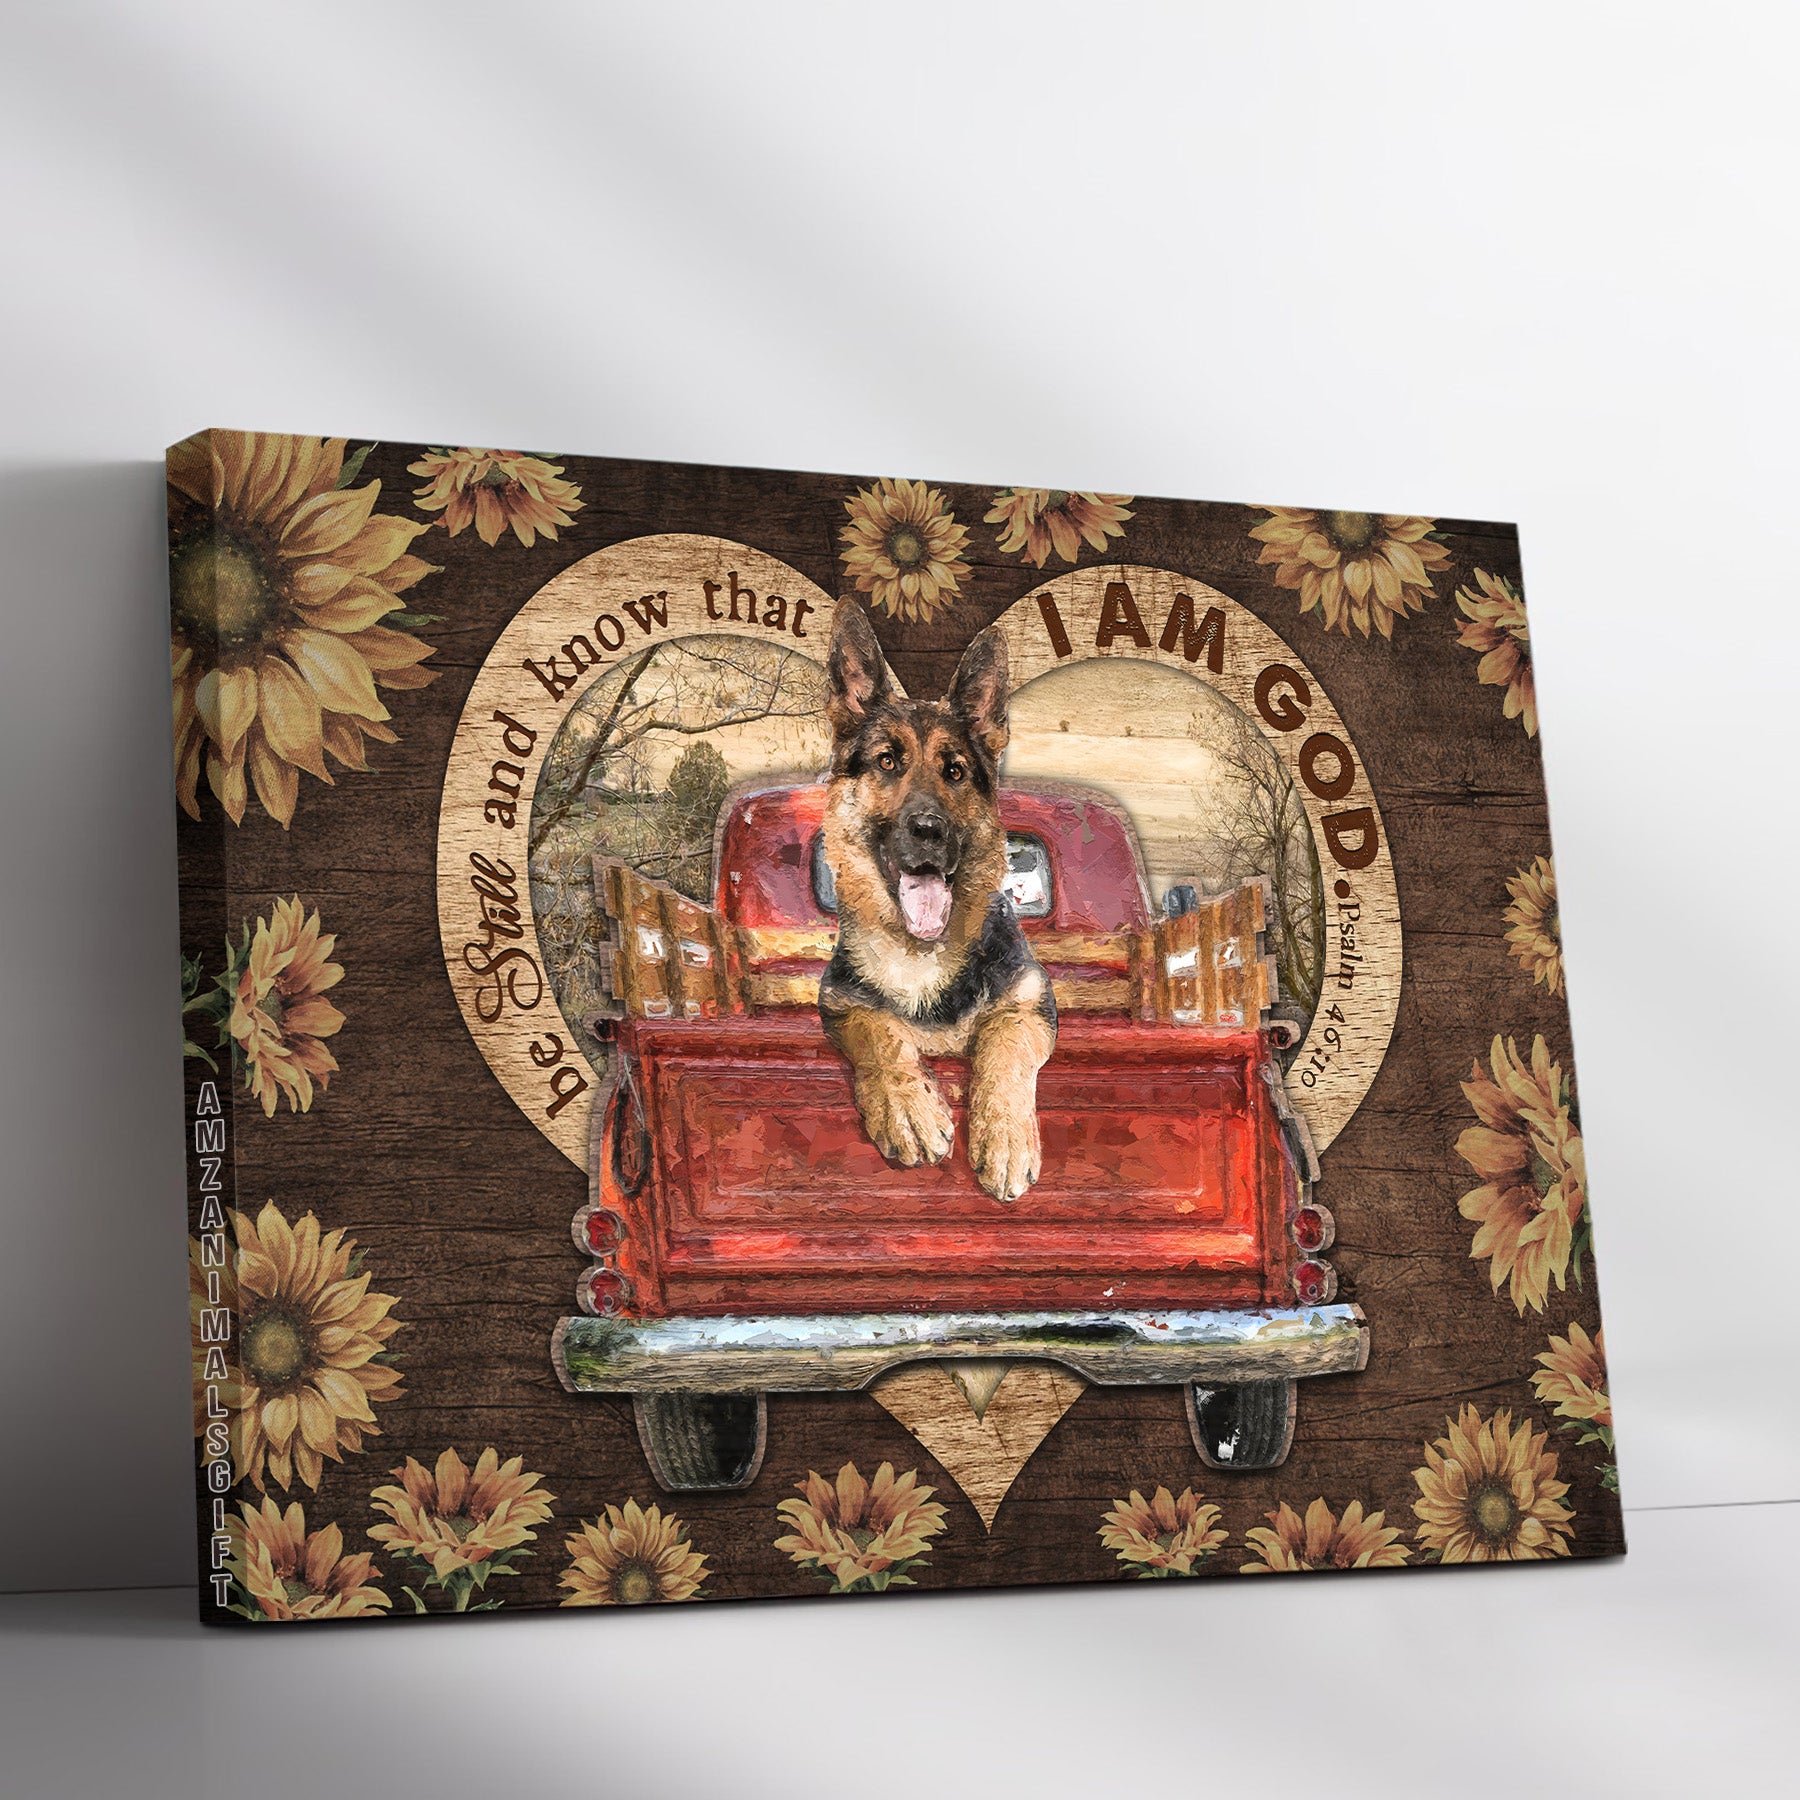 German Shepherd & Jesus Premium Wrapped Landscape Canvas - German shepherd, Red truck, Sunflower, Be still and know that I am God - Gift For Christian